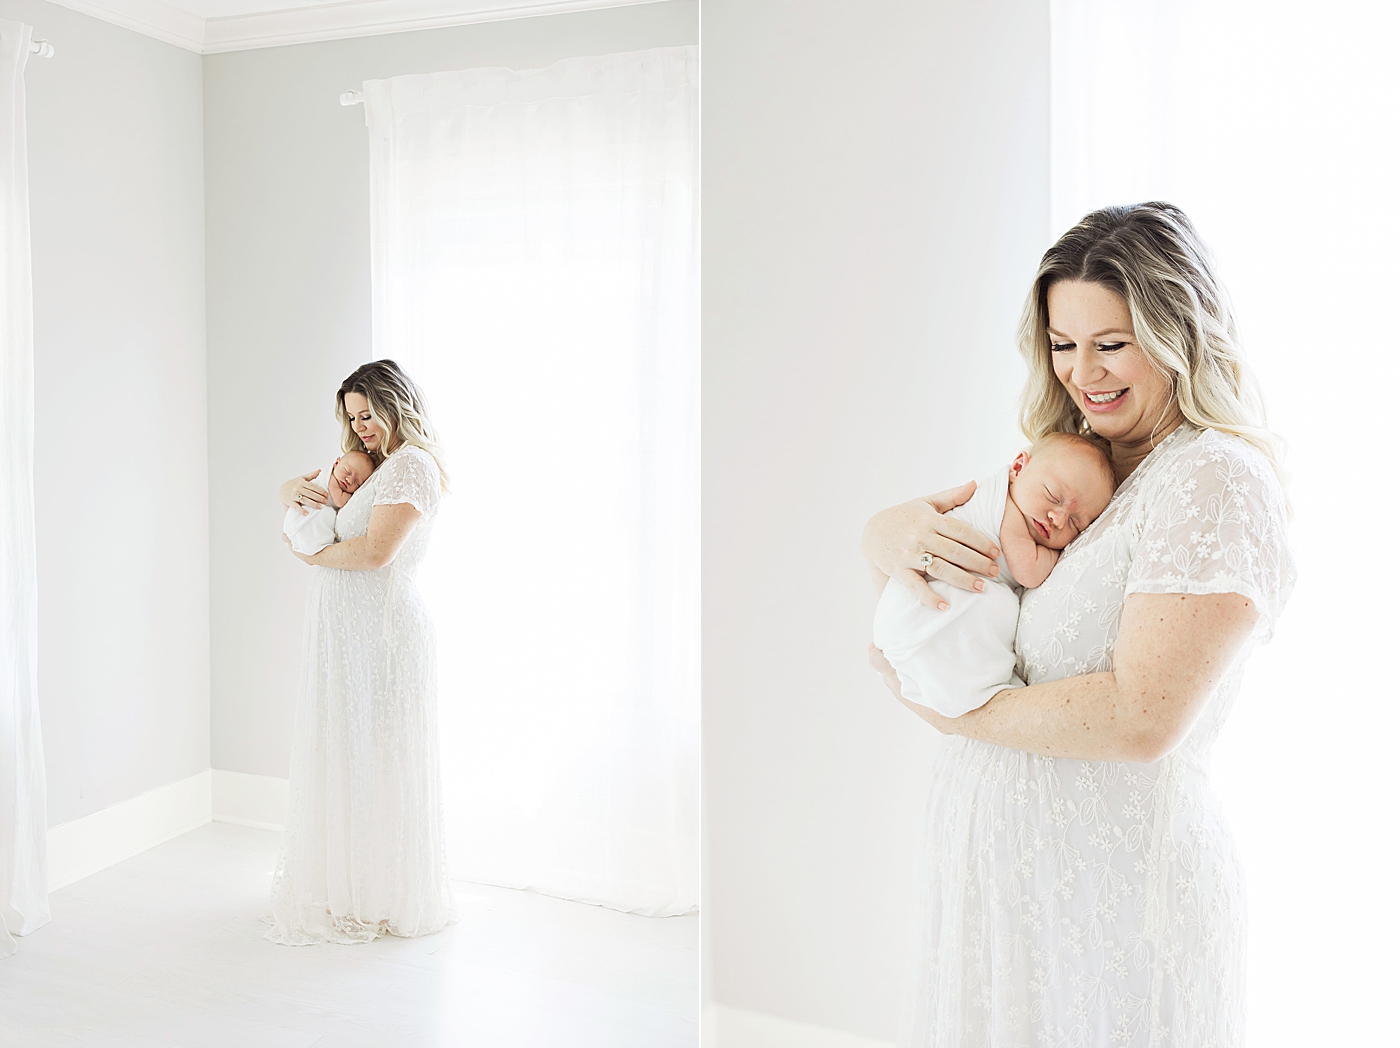 Mom wearing all white holding baby swaddled in white blanket. Photo by Fresh Light Photography.